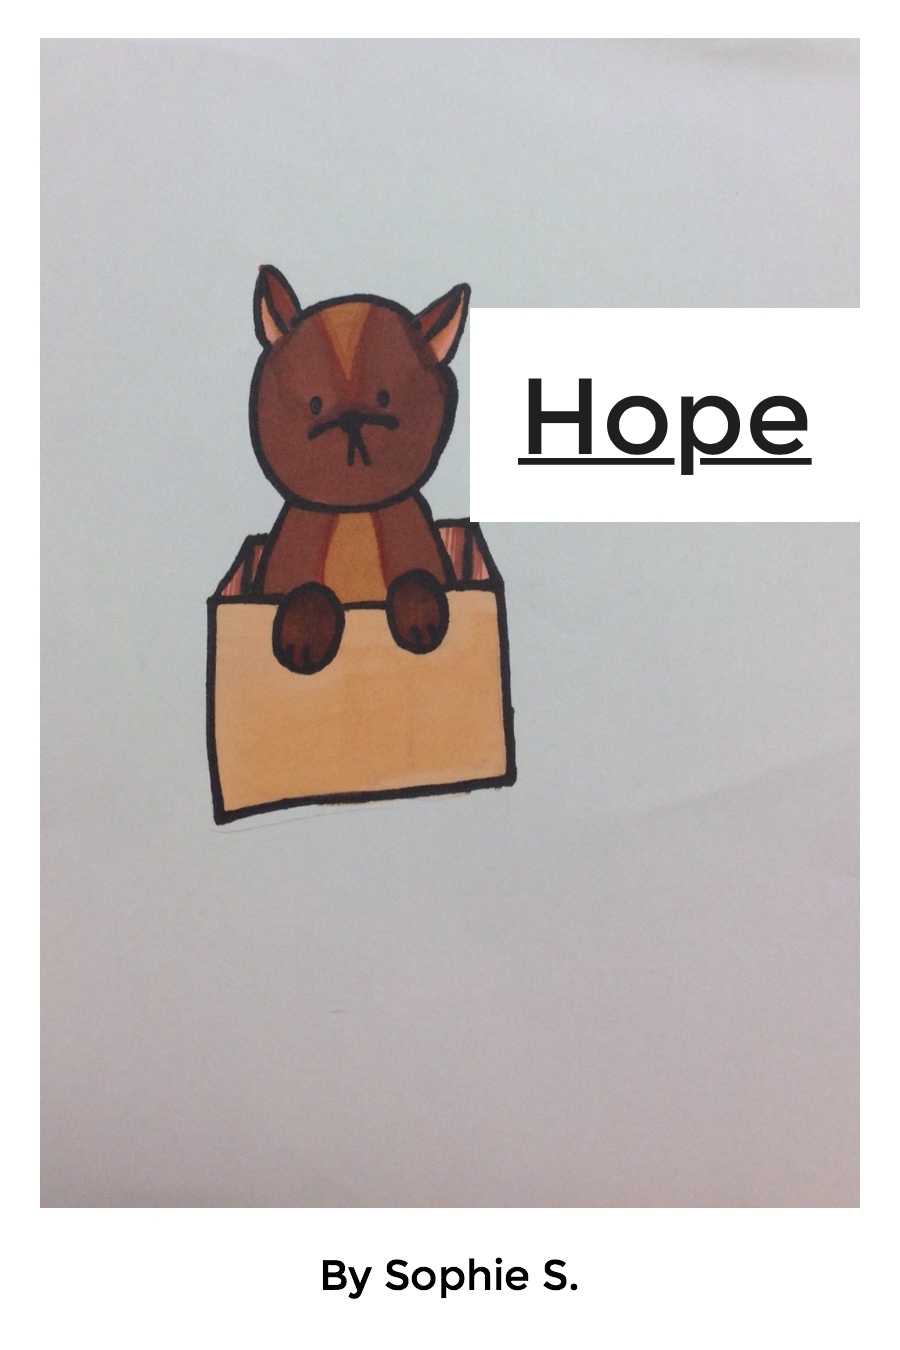 Hope by Sophie S